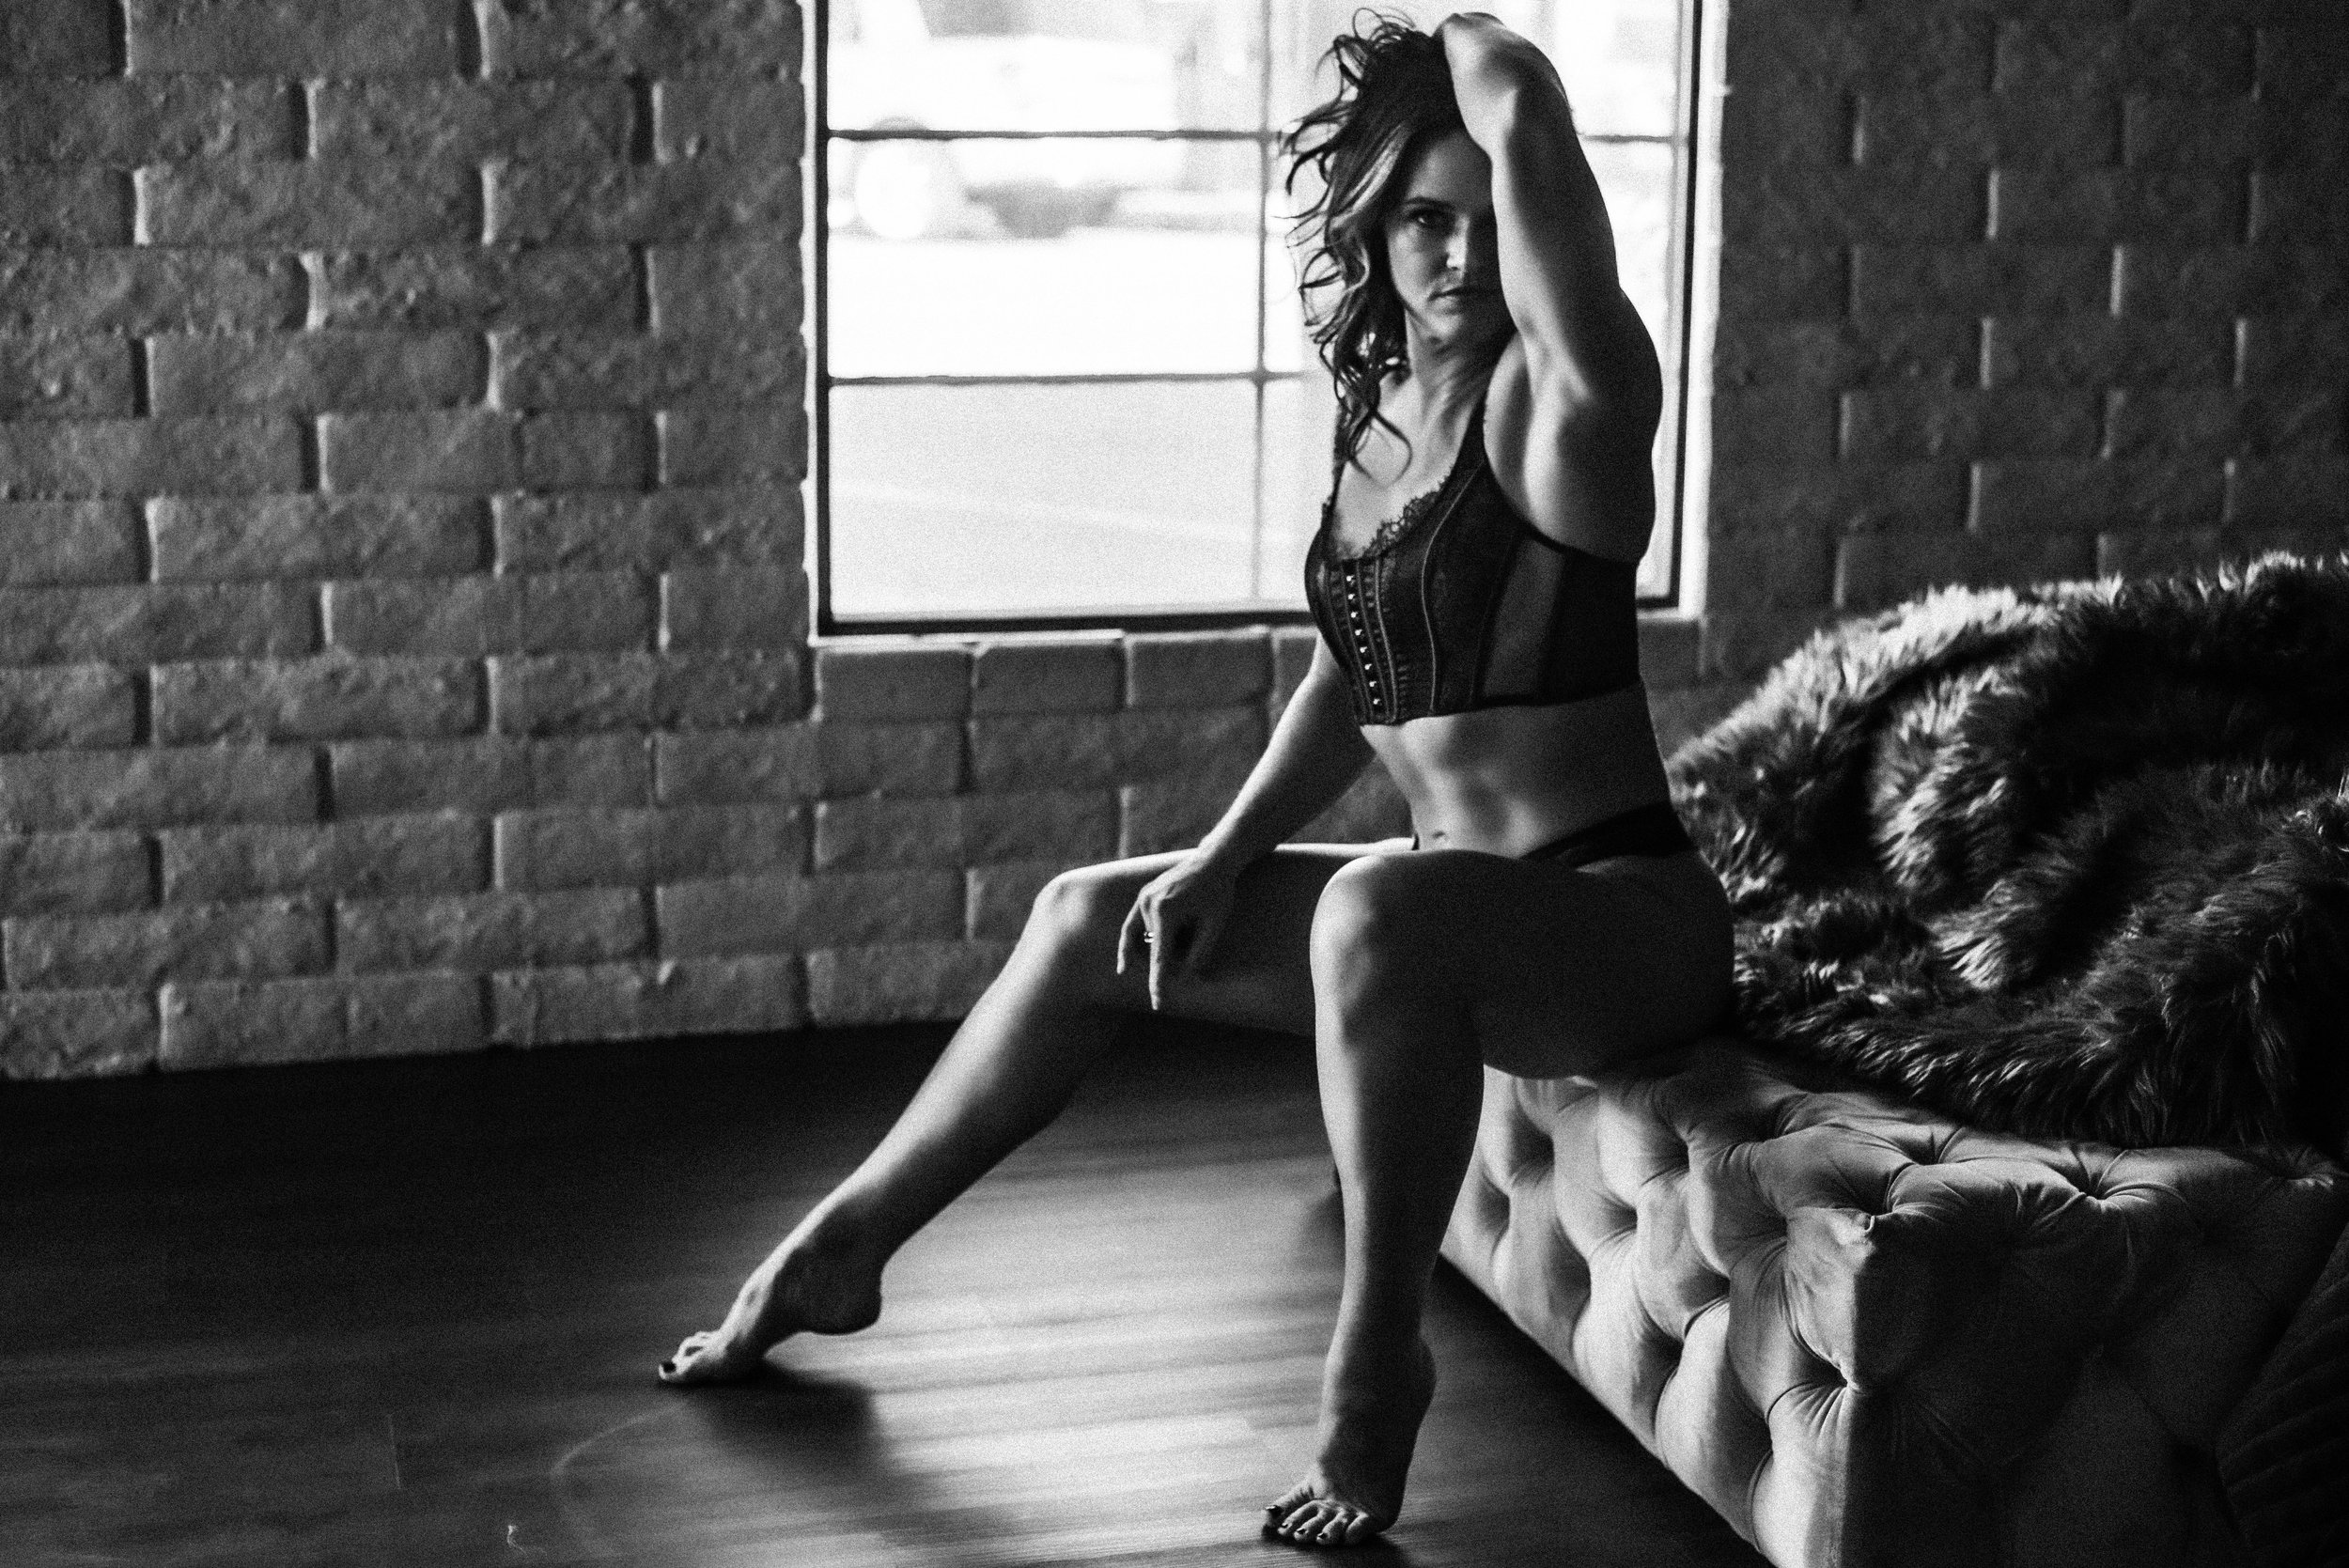 Fitness boudoir photos in black and white